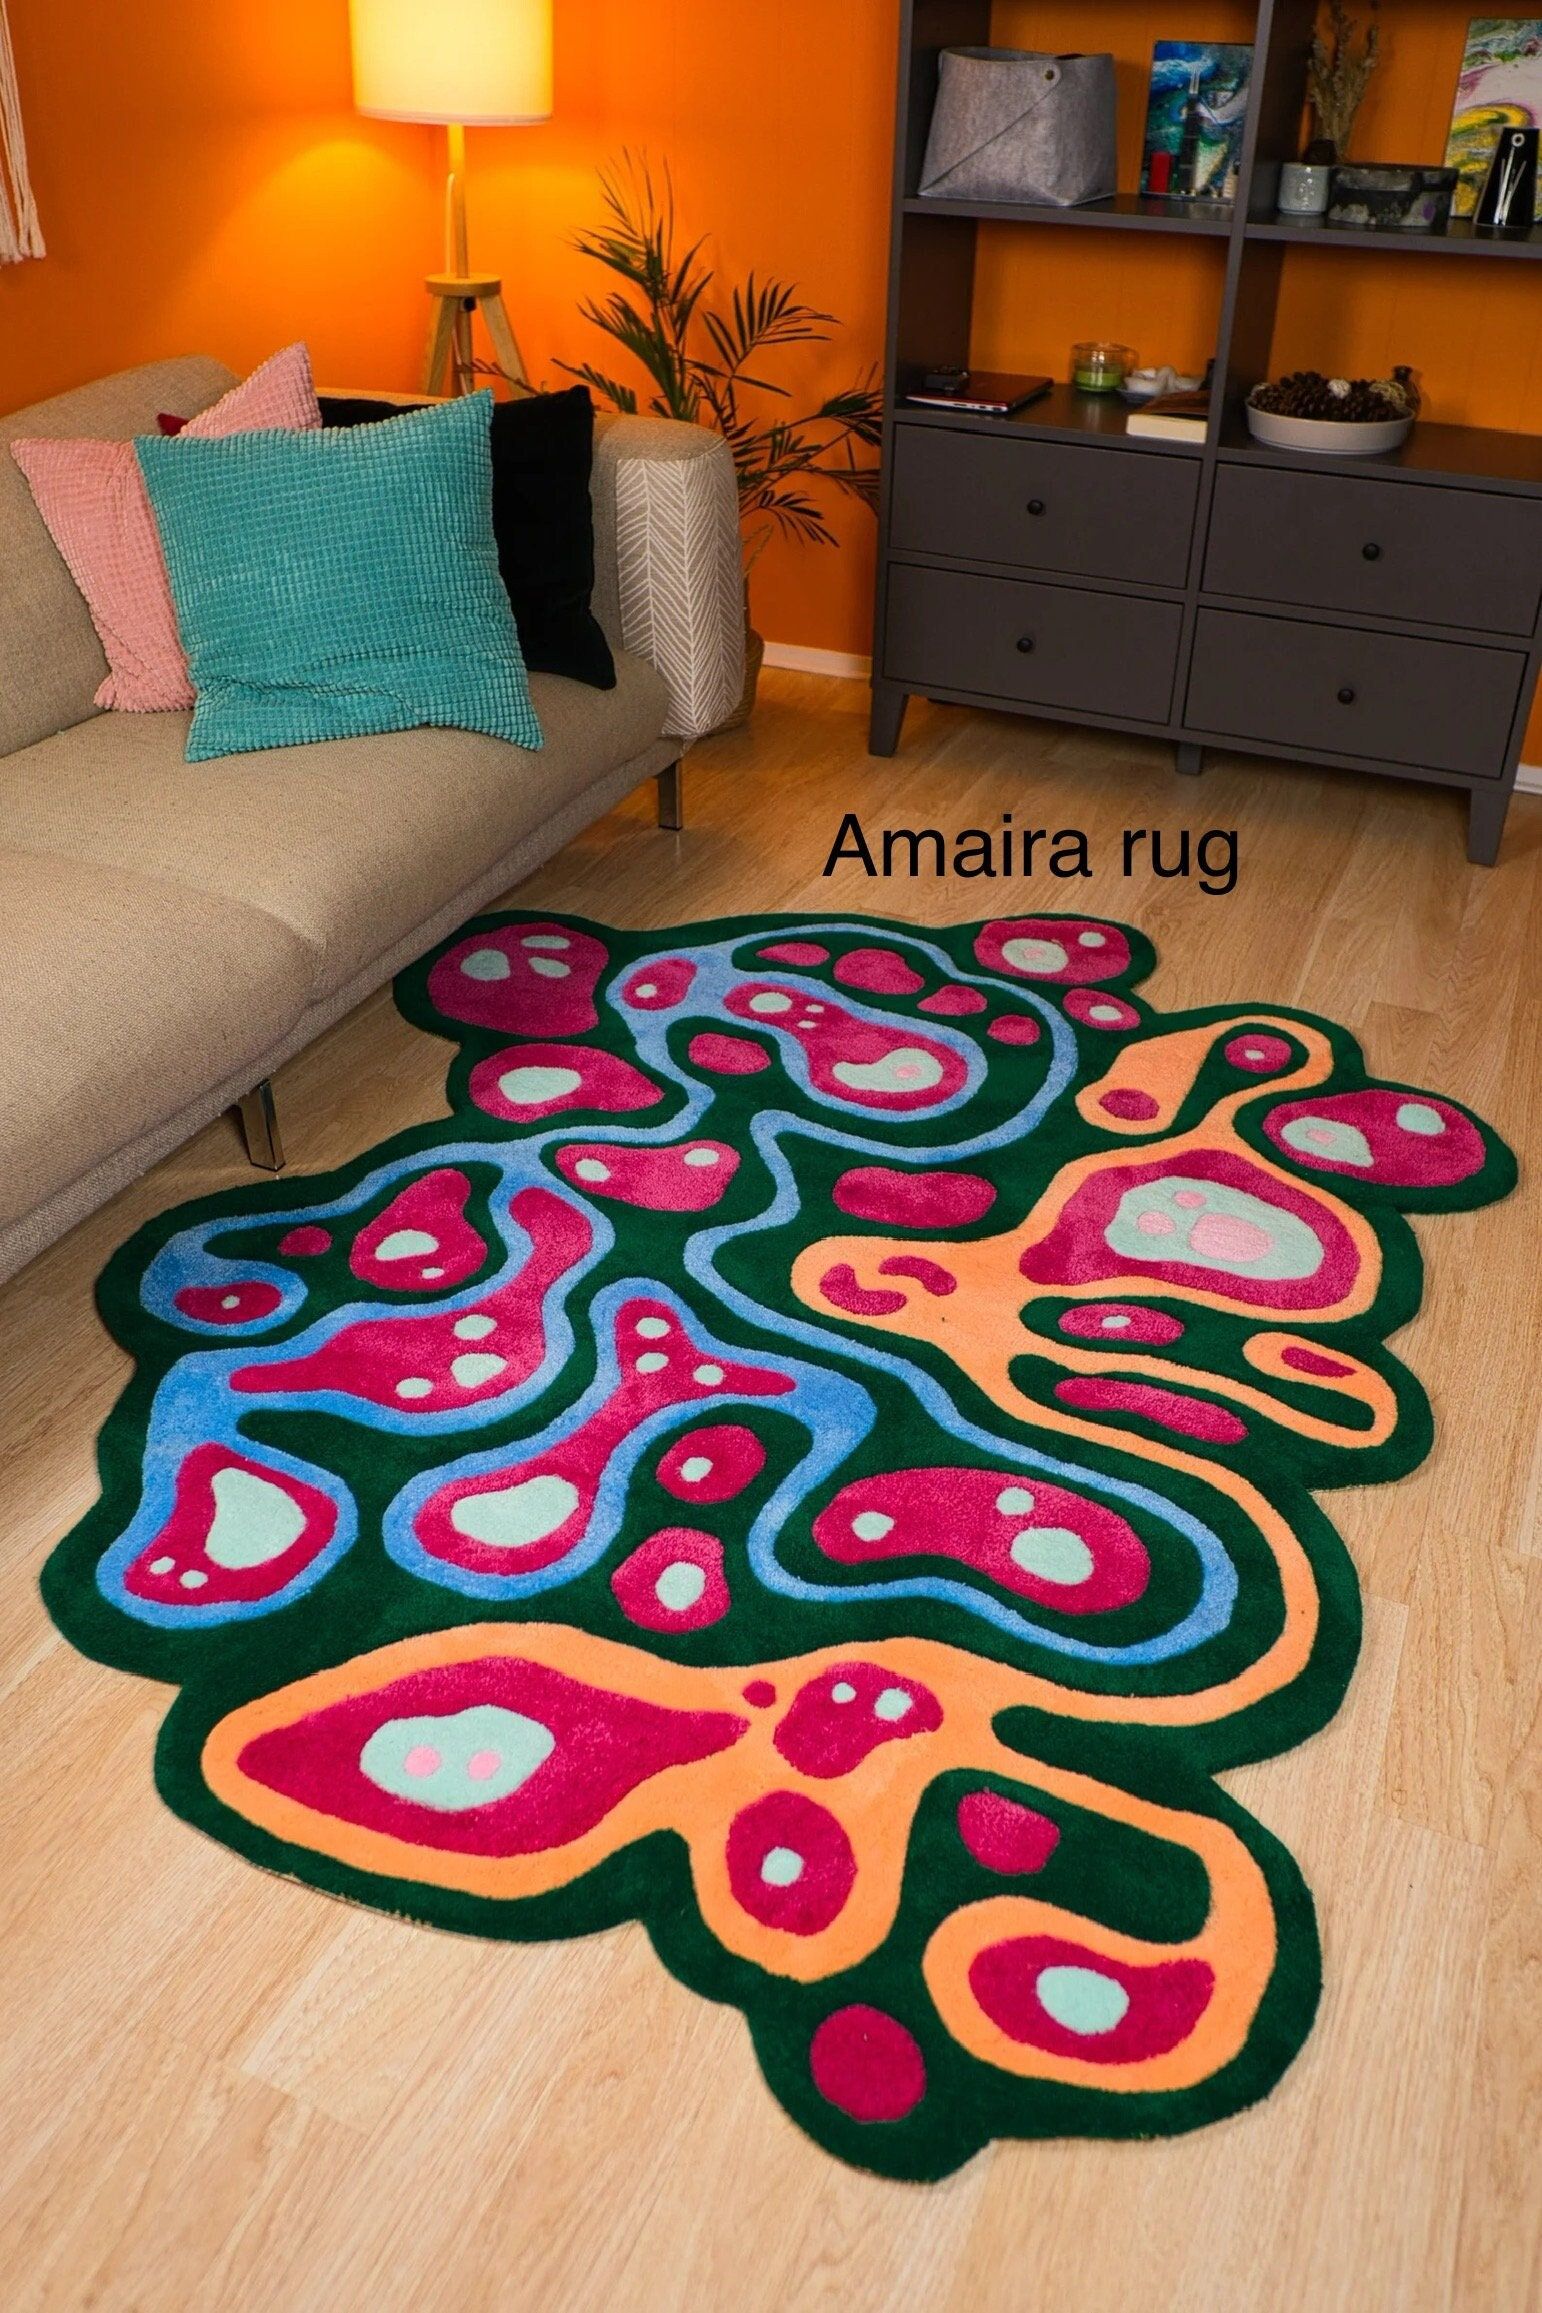 Hand-tufted rugs